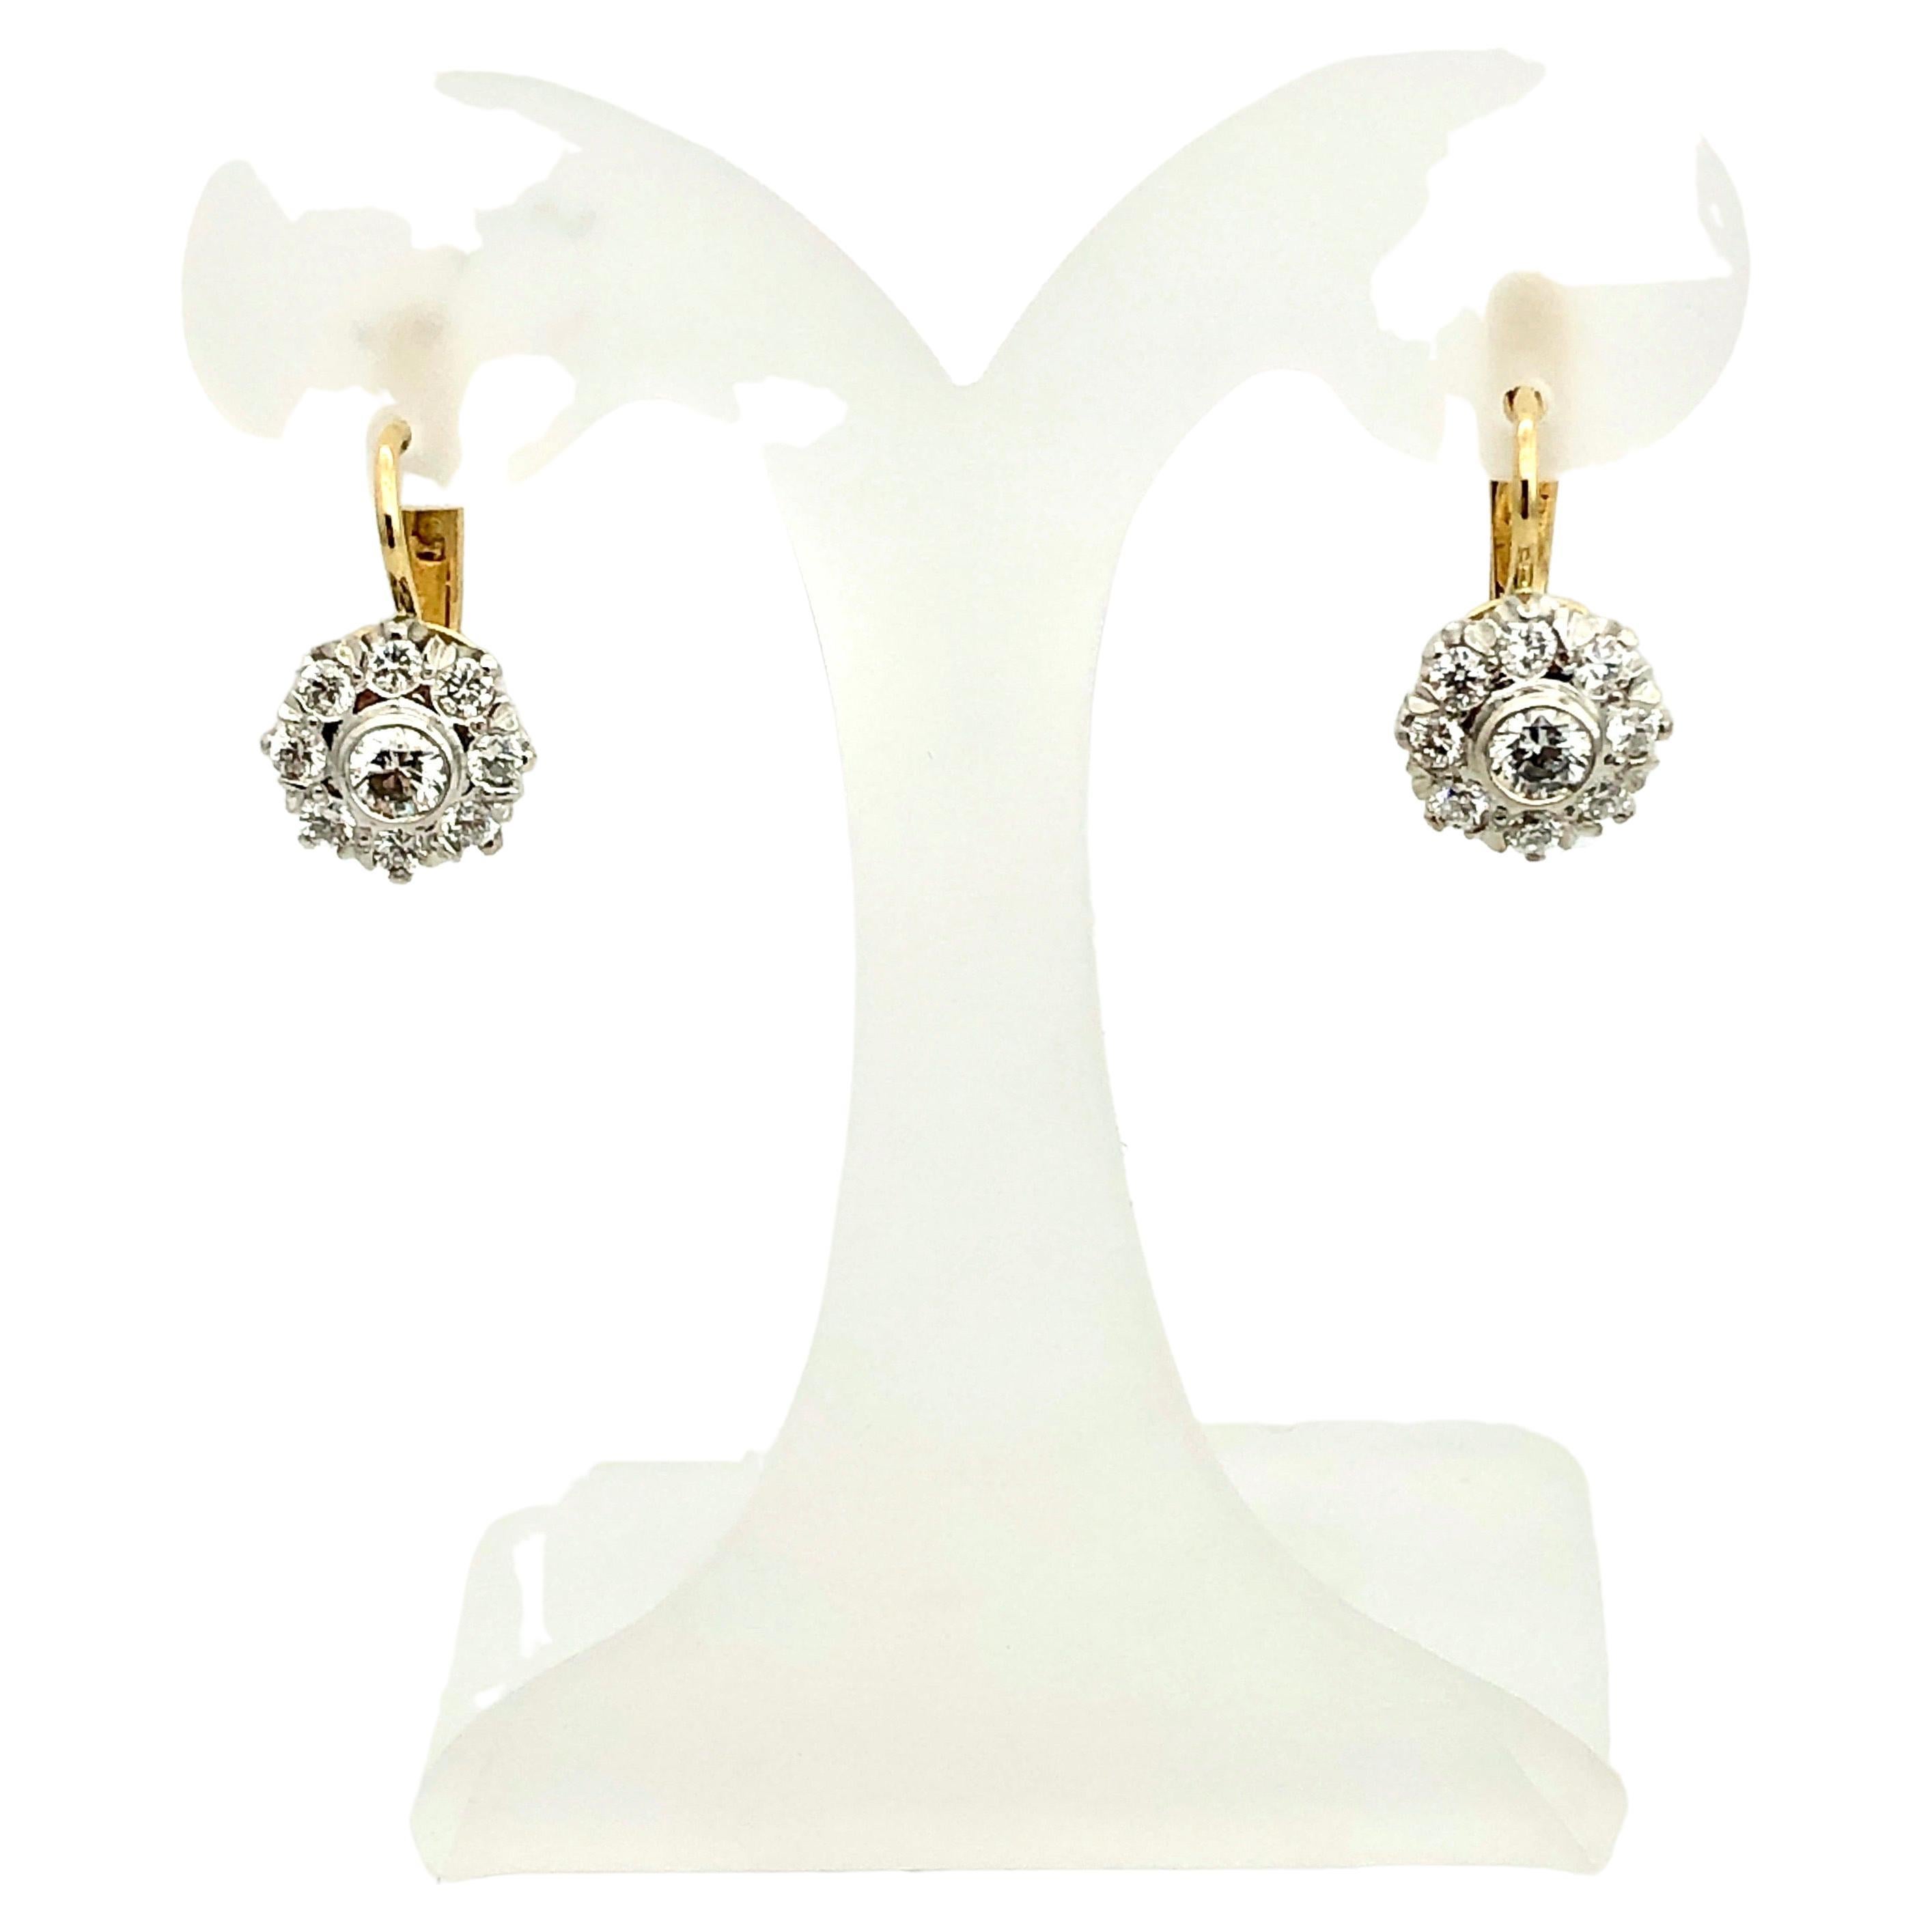 Classic hand made 18 carat yellow gold earrings with 18 sparkling brilliant cut diamonds
claw set in 18 carat white gold flowers, measuring 9 mm x 9mm.
Very safe continental snap-in lock
Setting thickness is 6.6 mm
Two centre diamonds are totalling